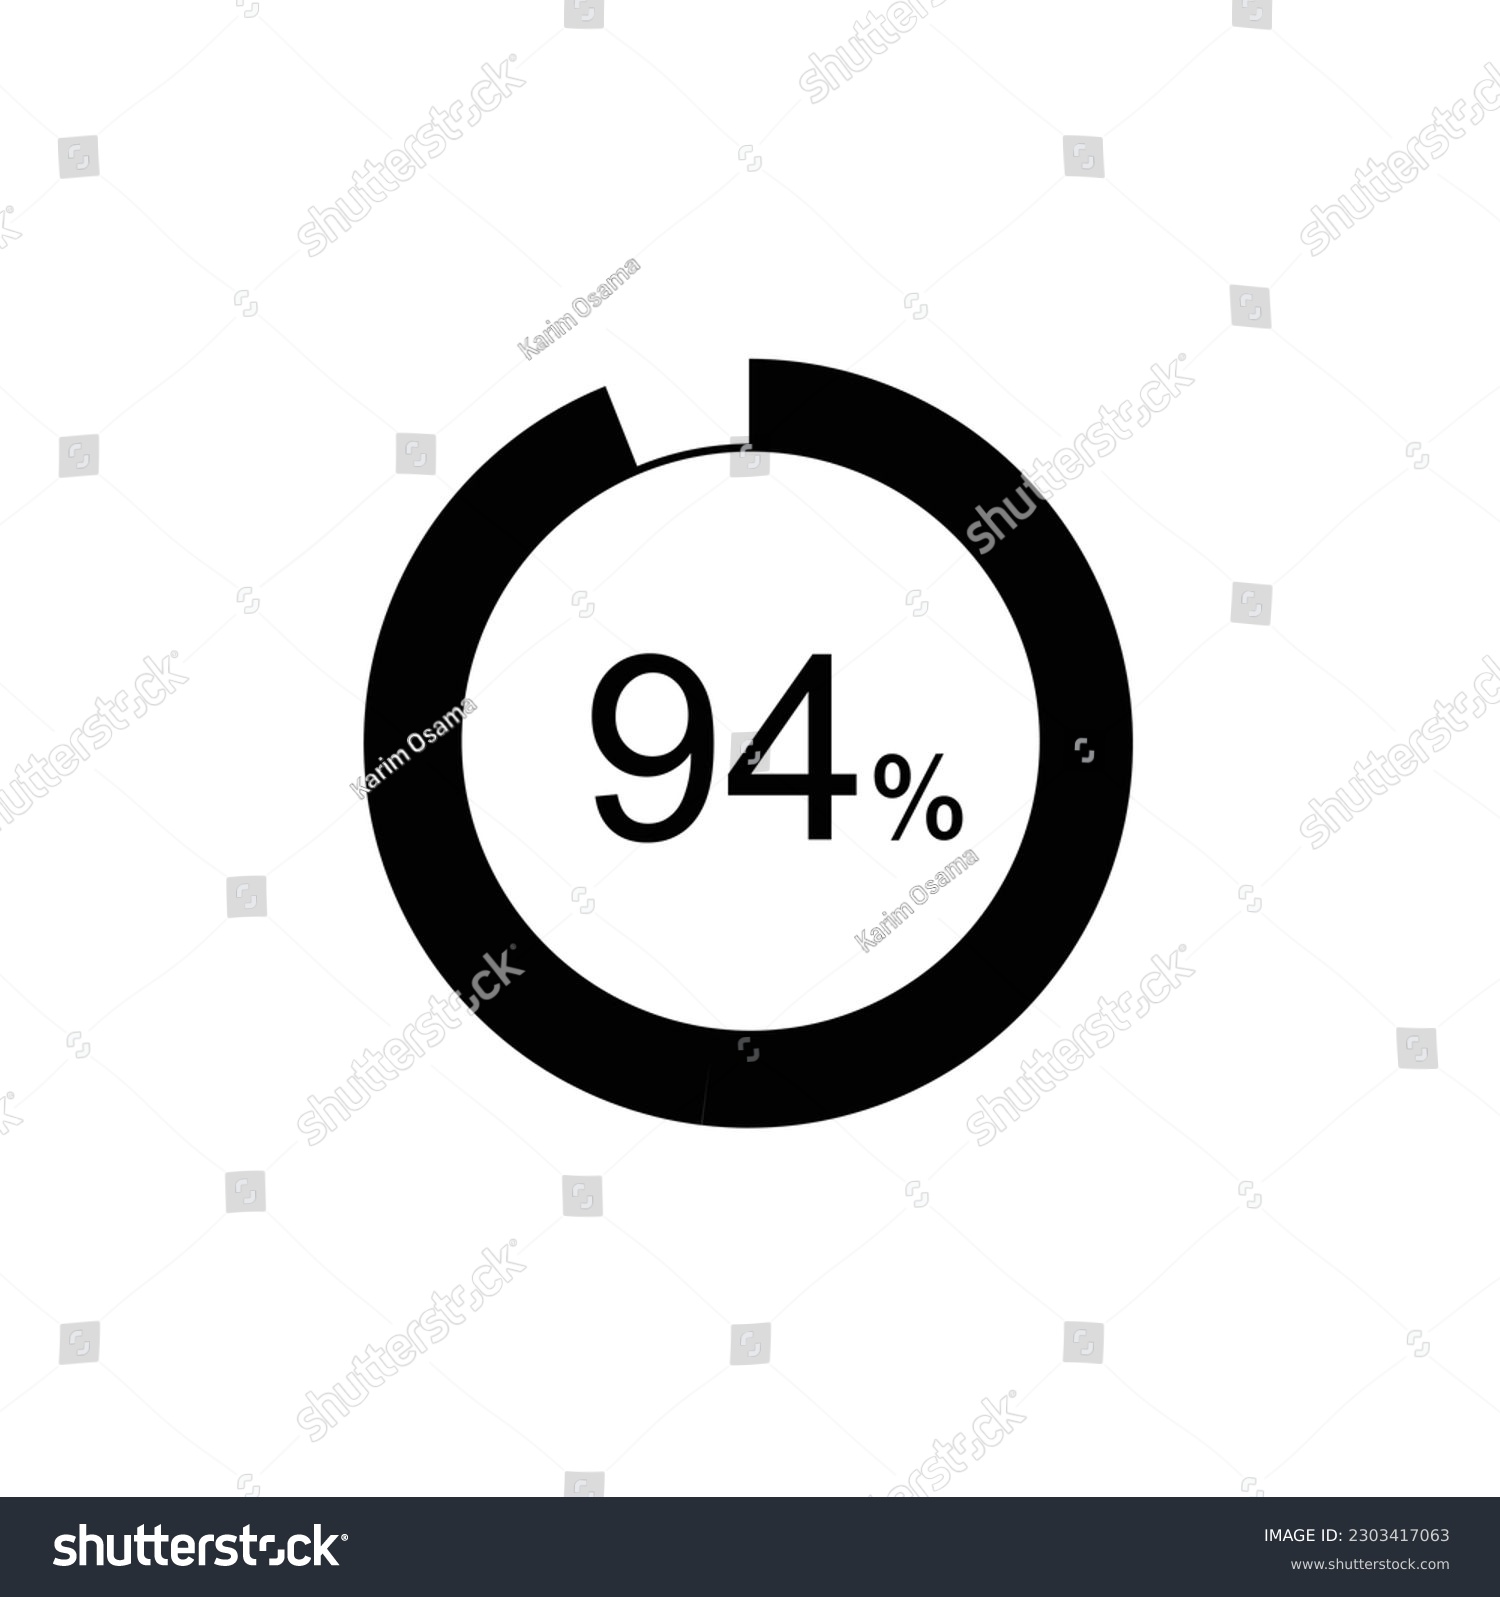 SVG of 94% percentage infographic circle icons,94 percents pie chart infographic elements for Illustration, business, web design. svg